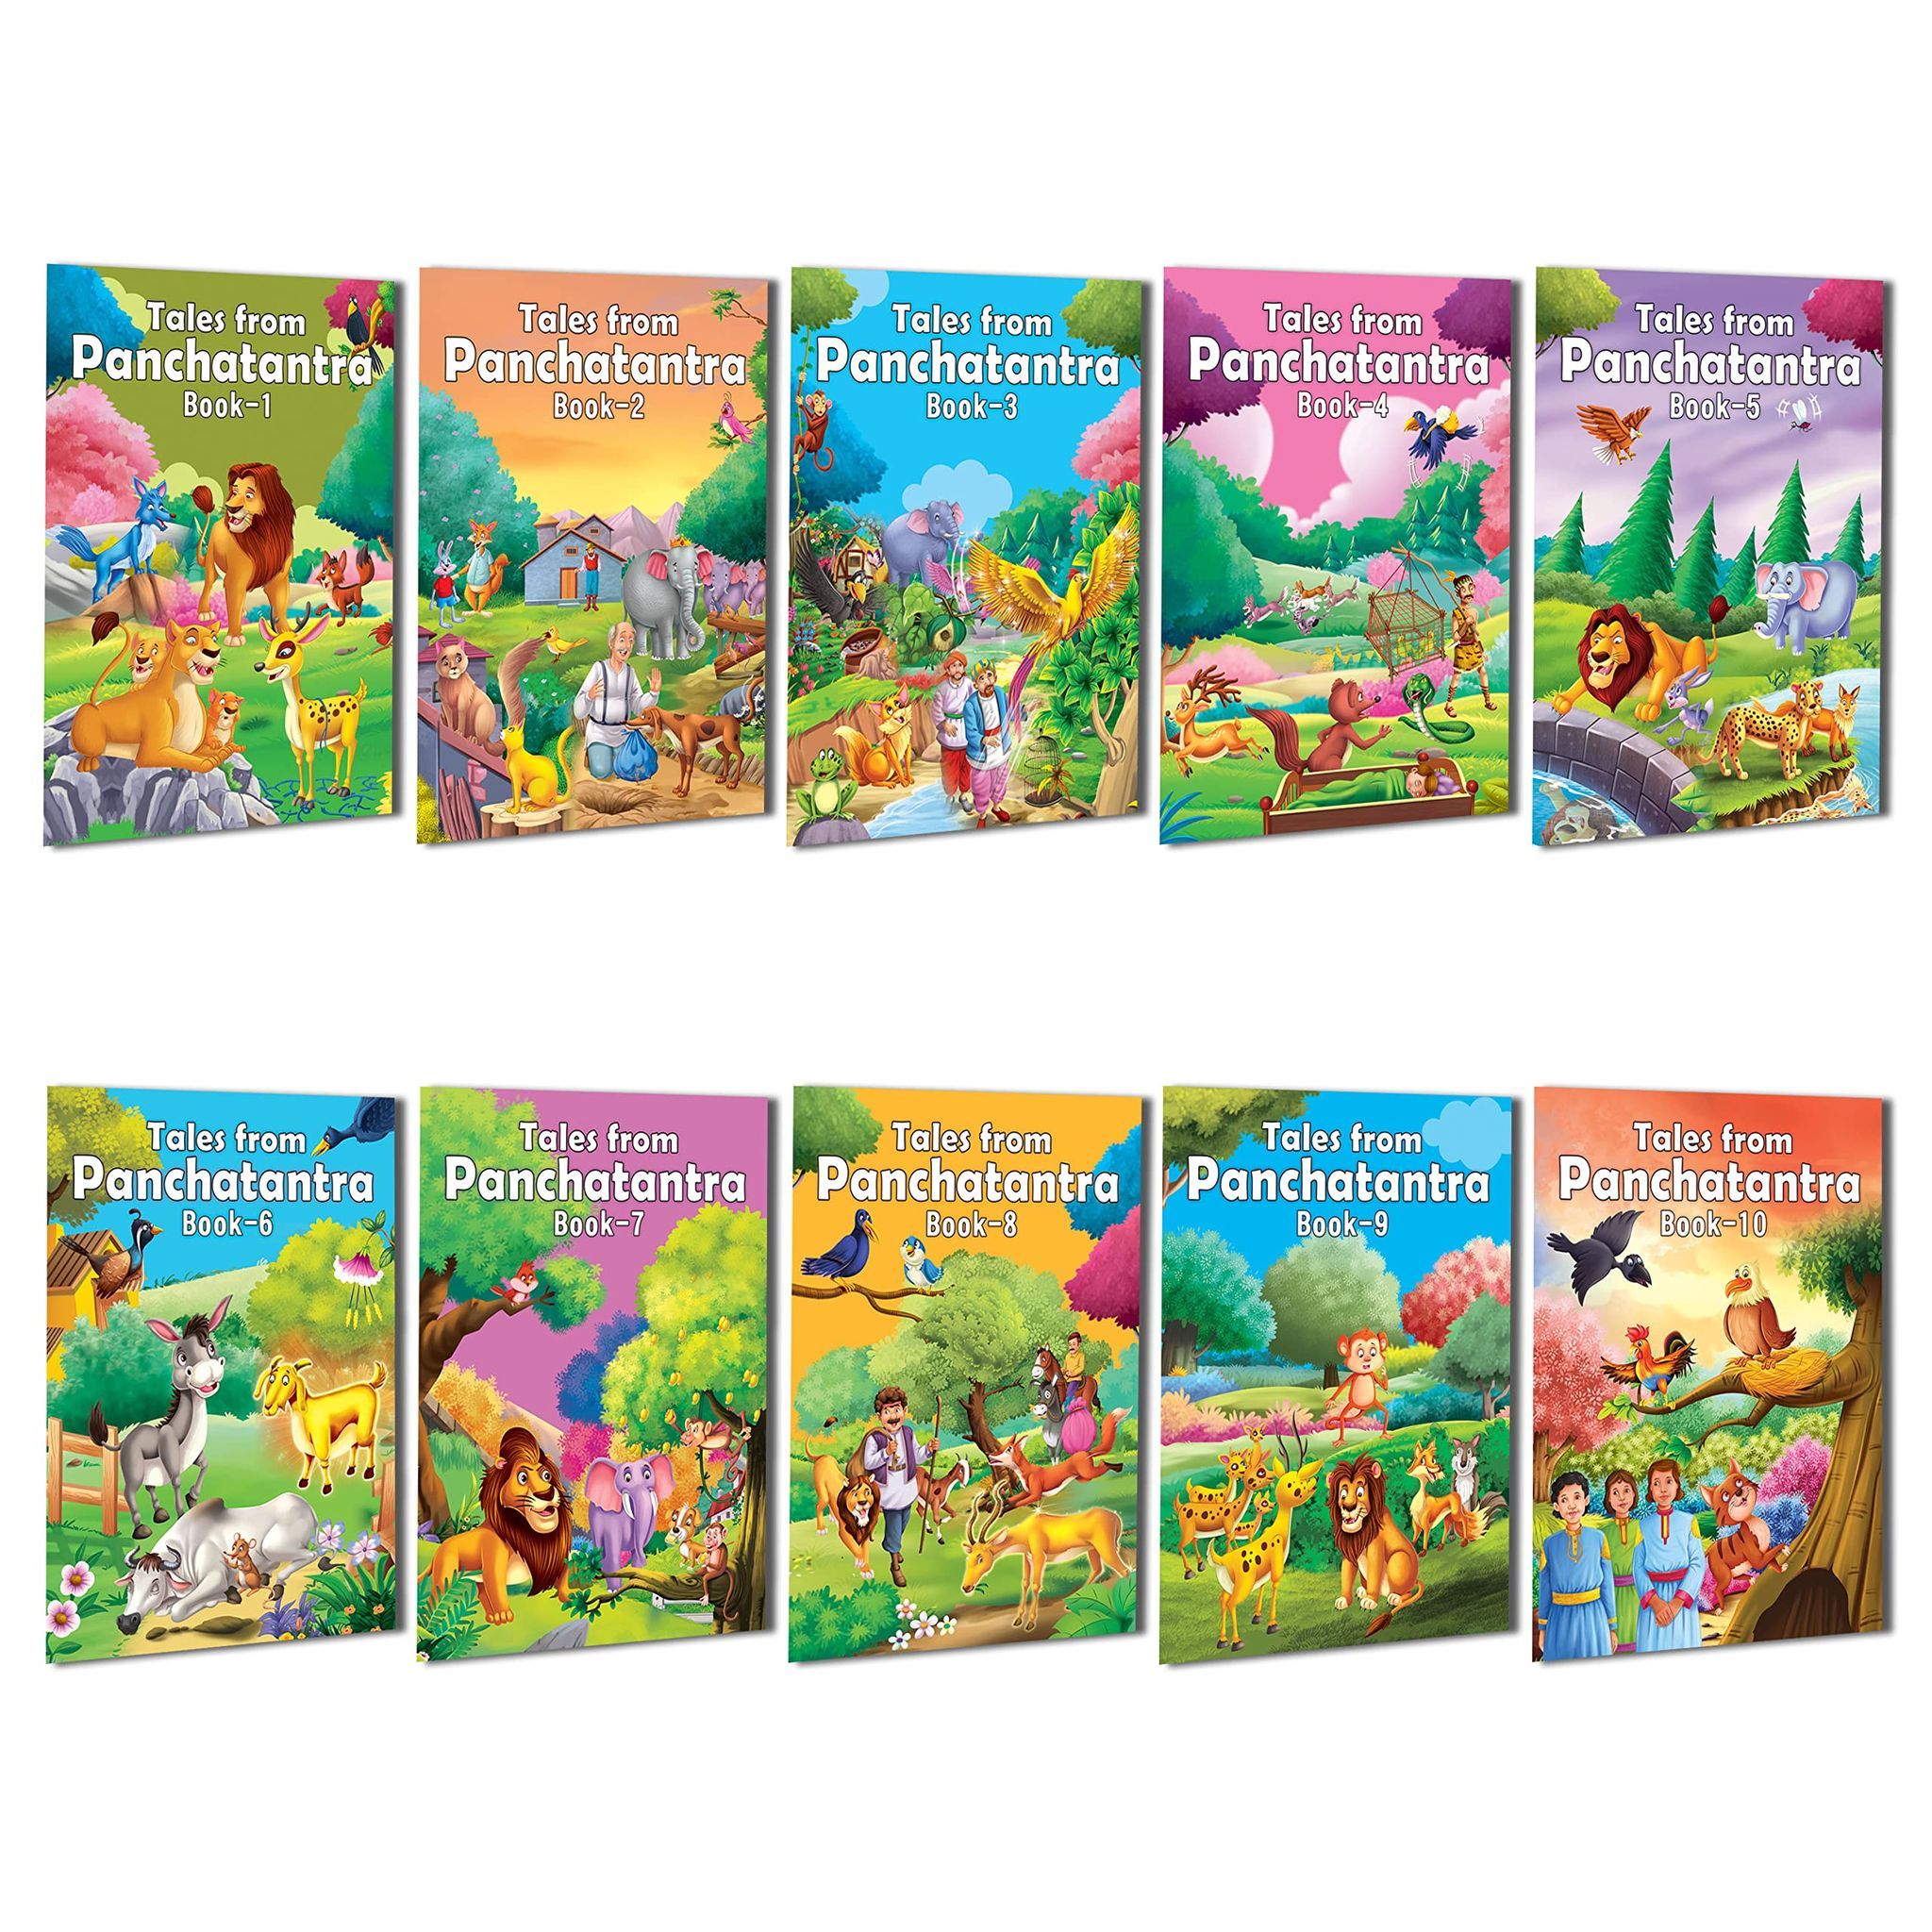 Tales from Panchatantra - A Pack of 10 Books | Traditional Panchatantra Stories for Children Age 4+ [Paperback] Dreamland Publications